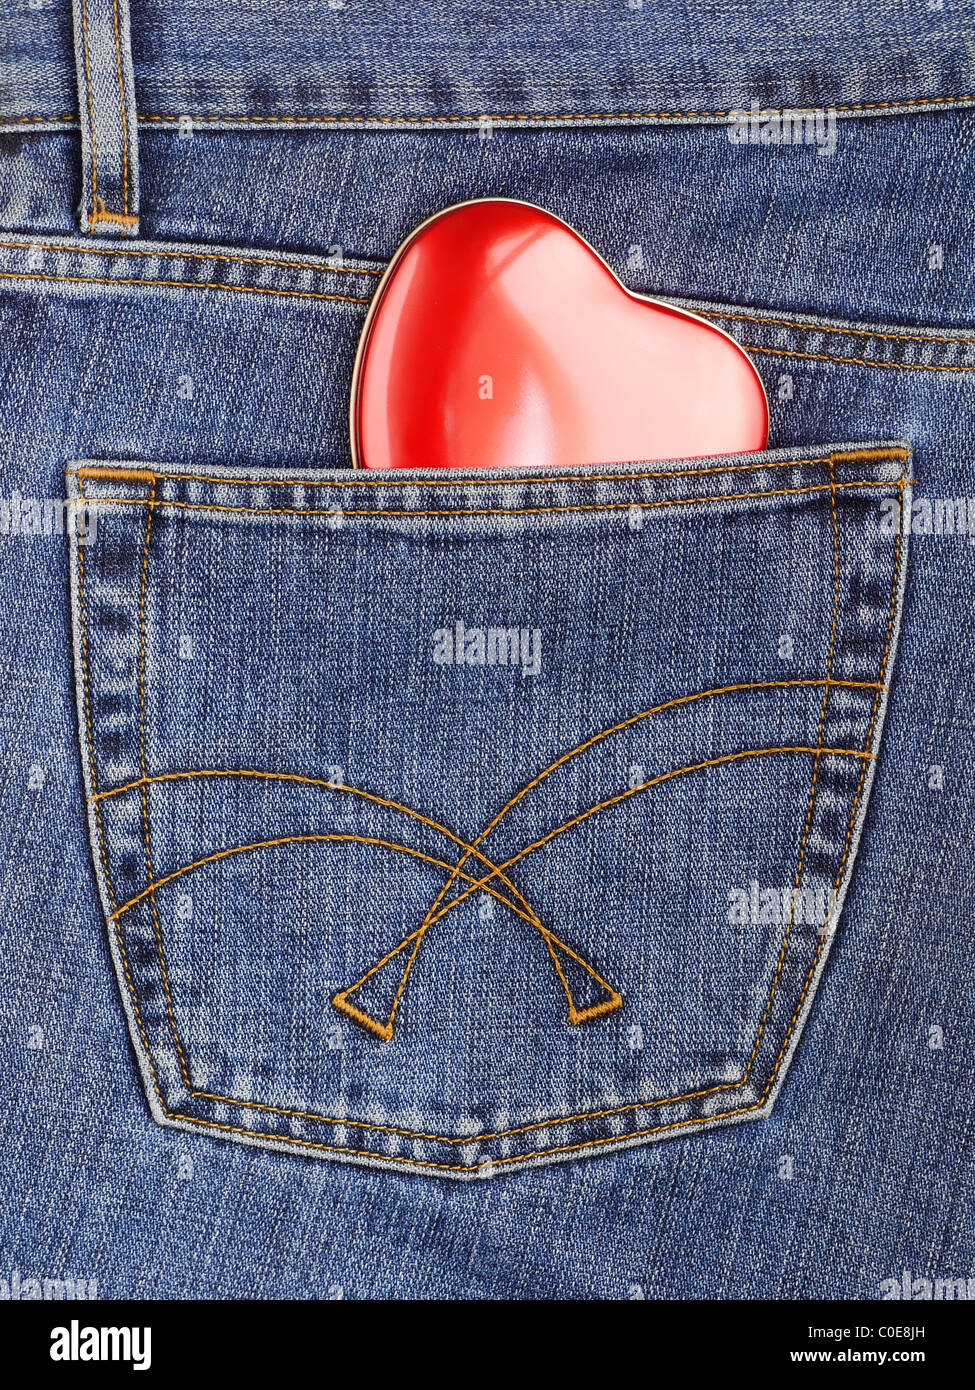 Red heart sticking out of blue jeans back pocket Stock Photo